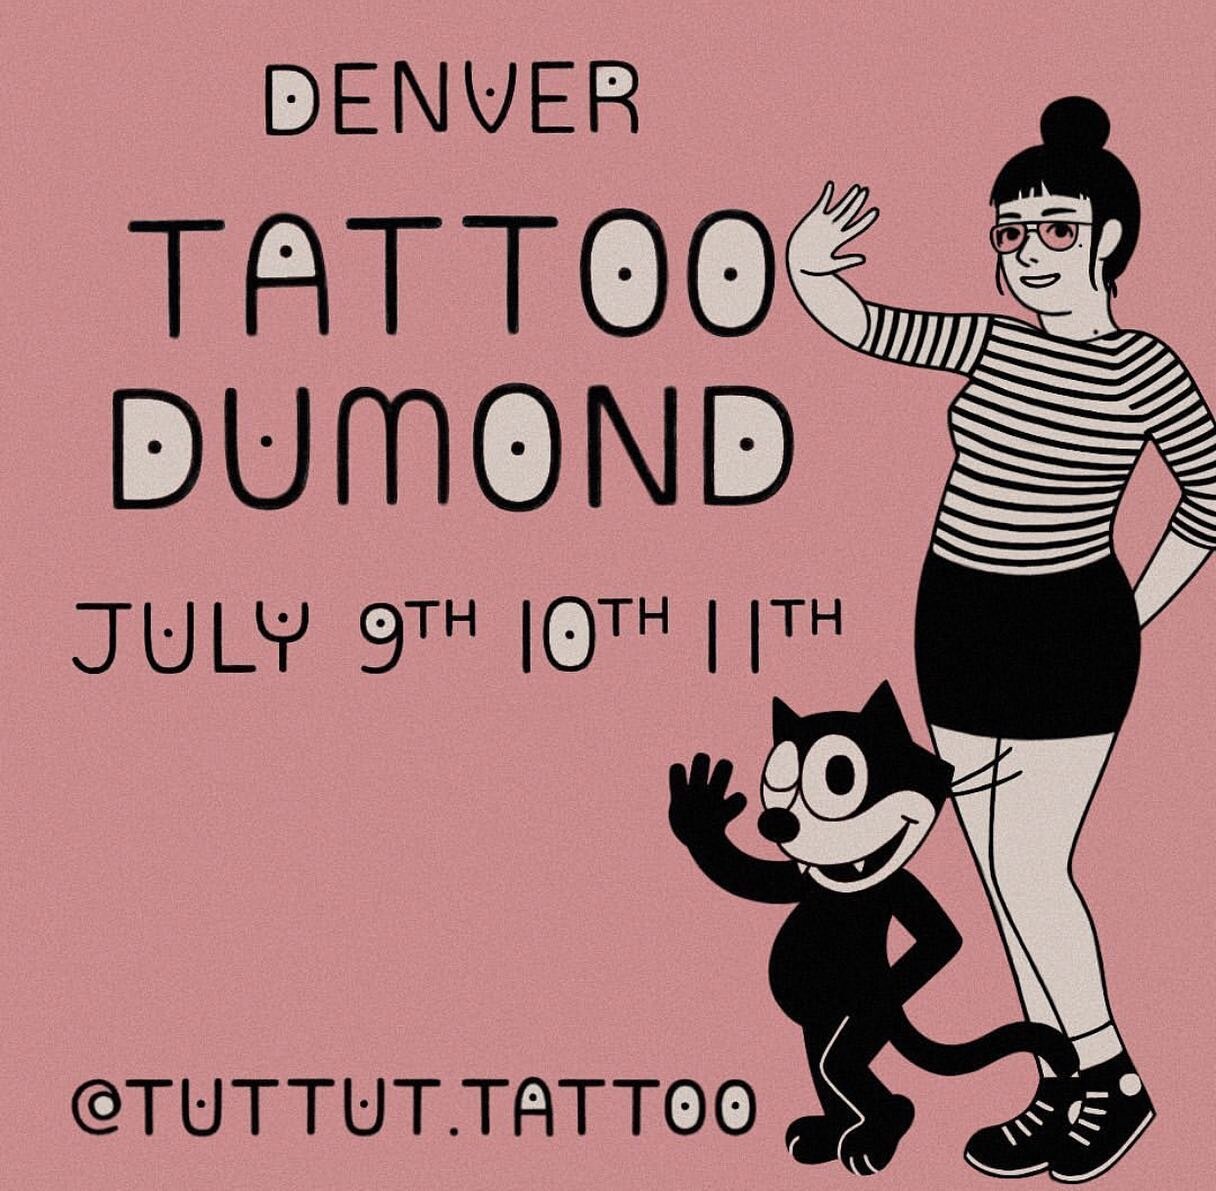 ❤️The one and only @tuttut.tattoo will be with is again this summer! Go to @tuttut.tattoo for booking info!! ❤️